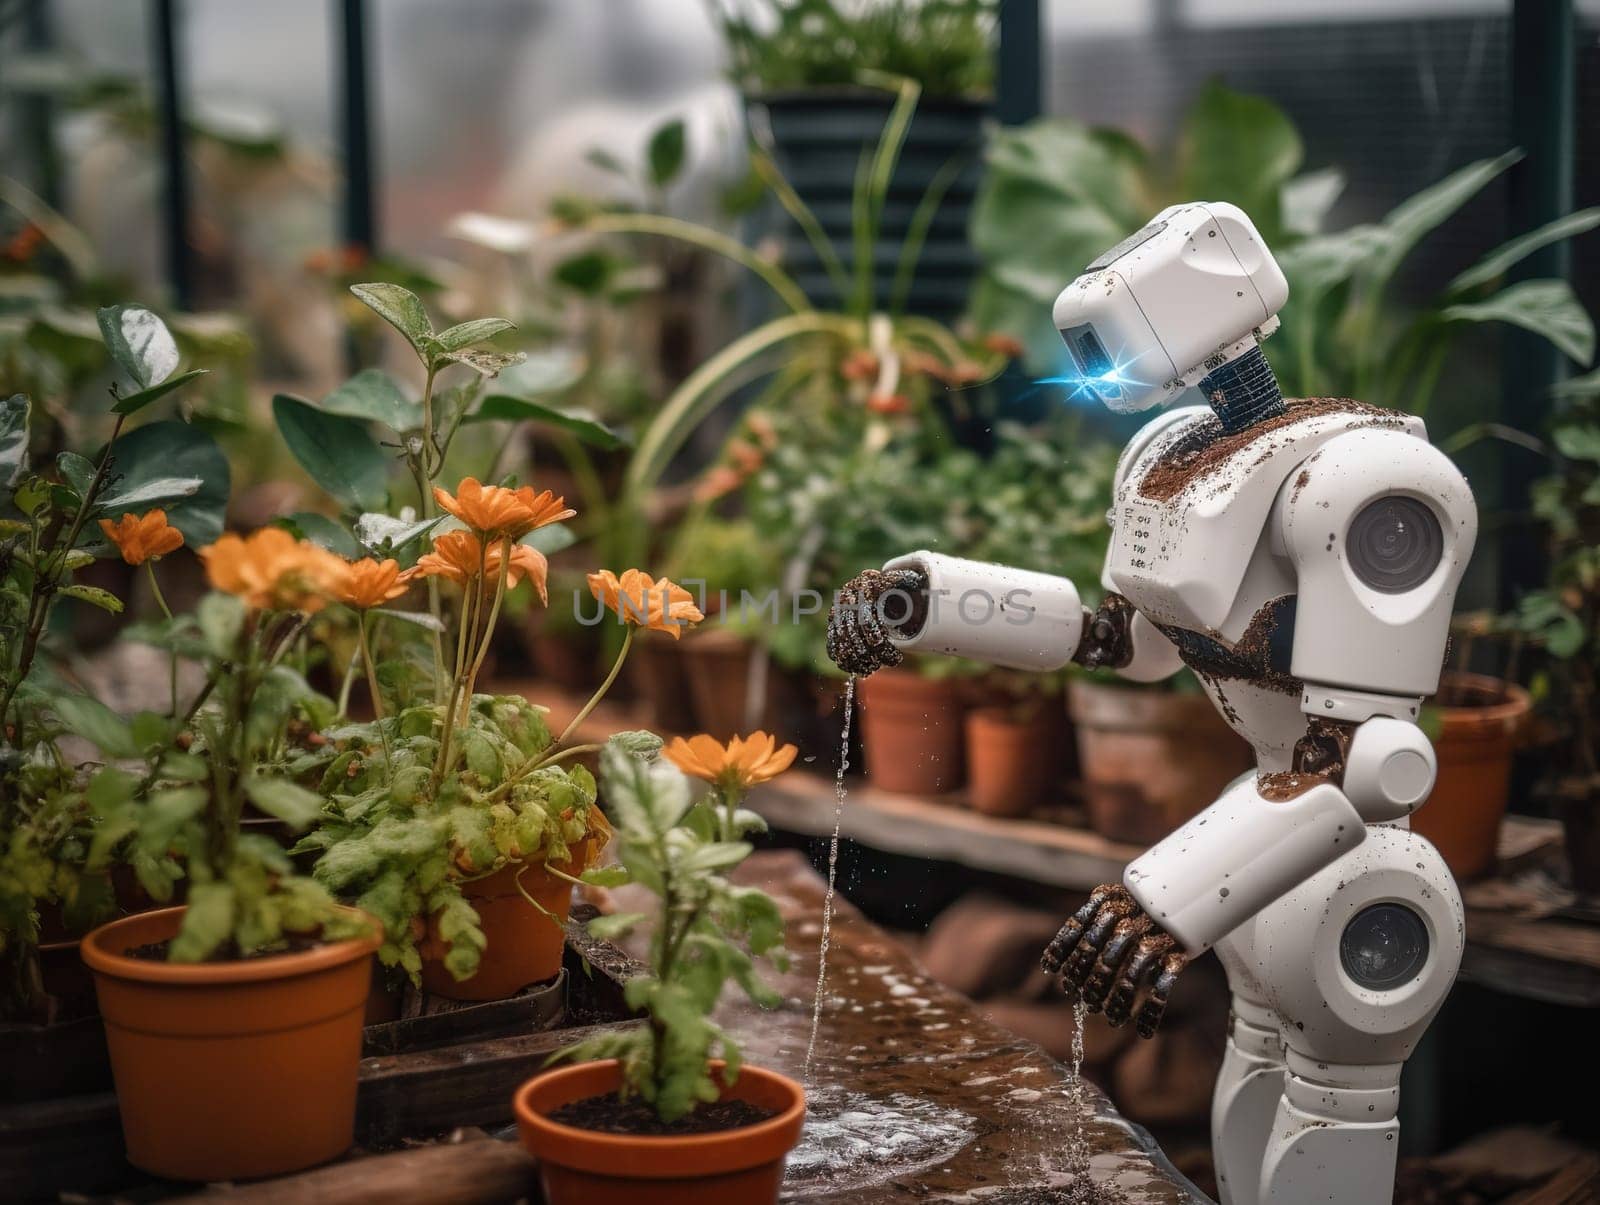 An Old-Style Android Robot Cultivates Flowers And Plants In A Greenhouse